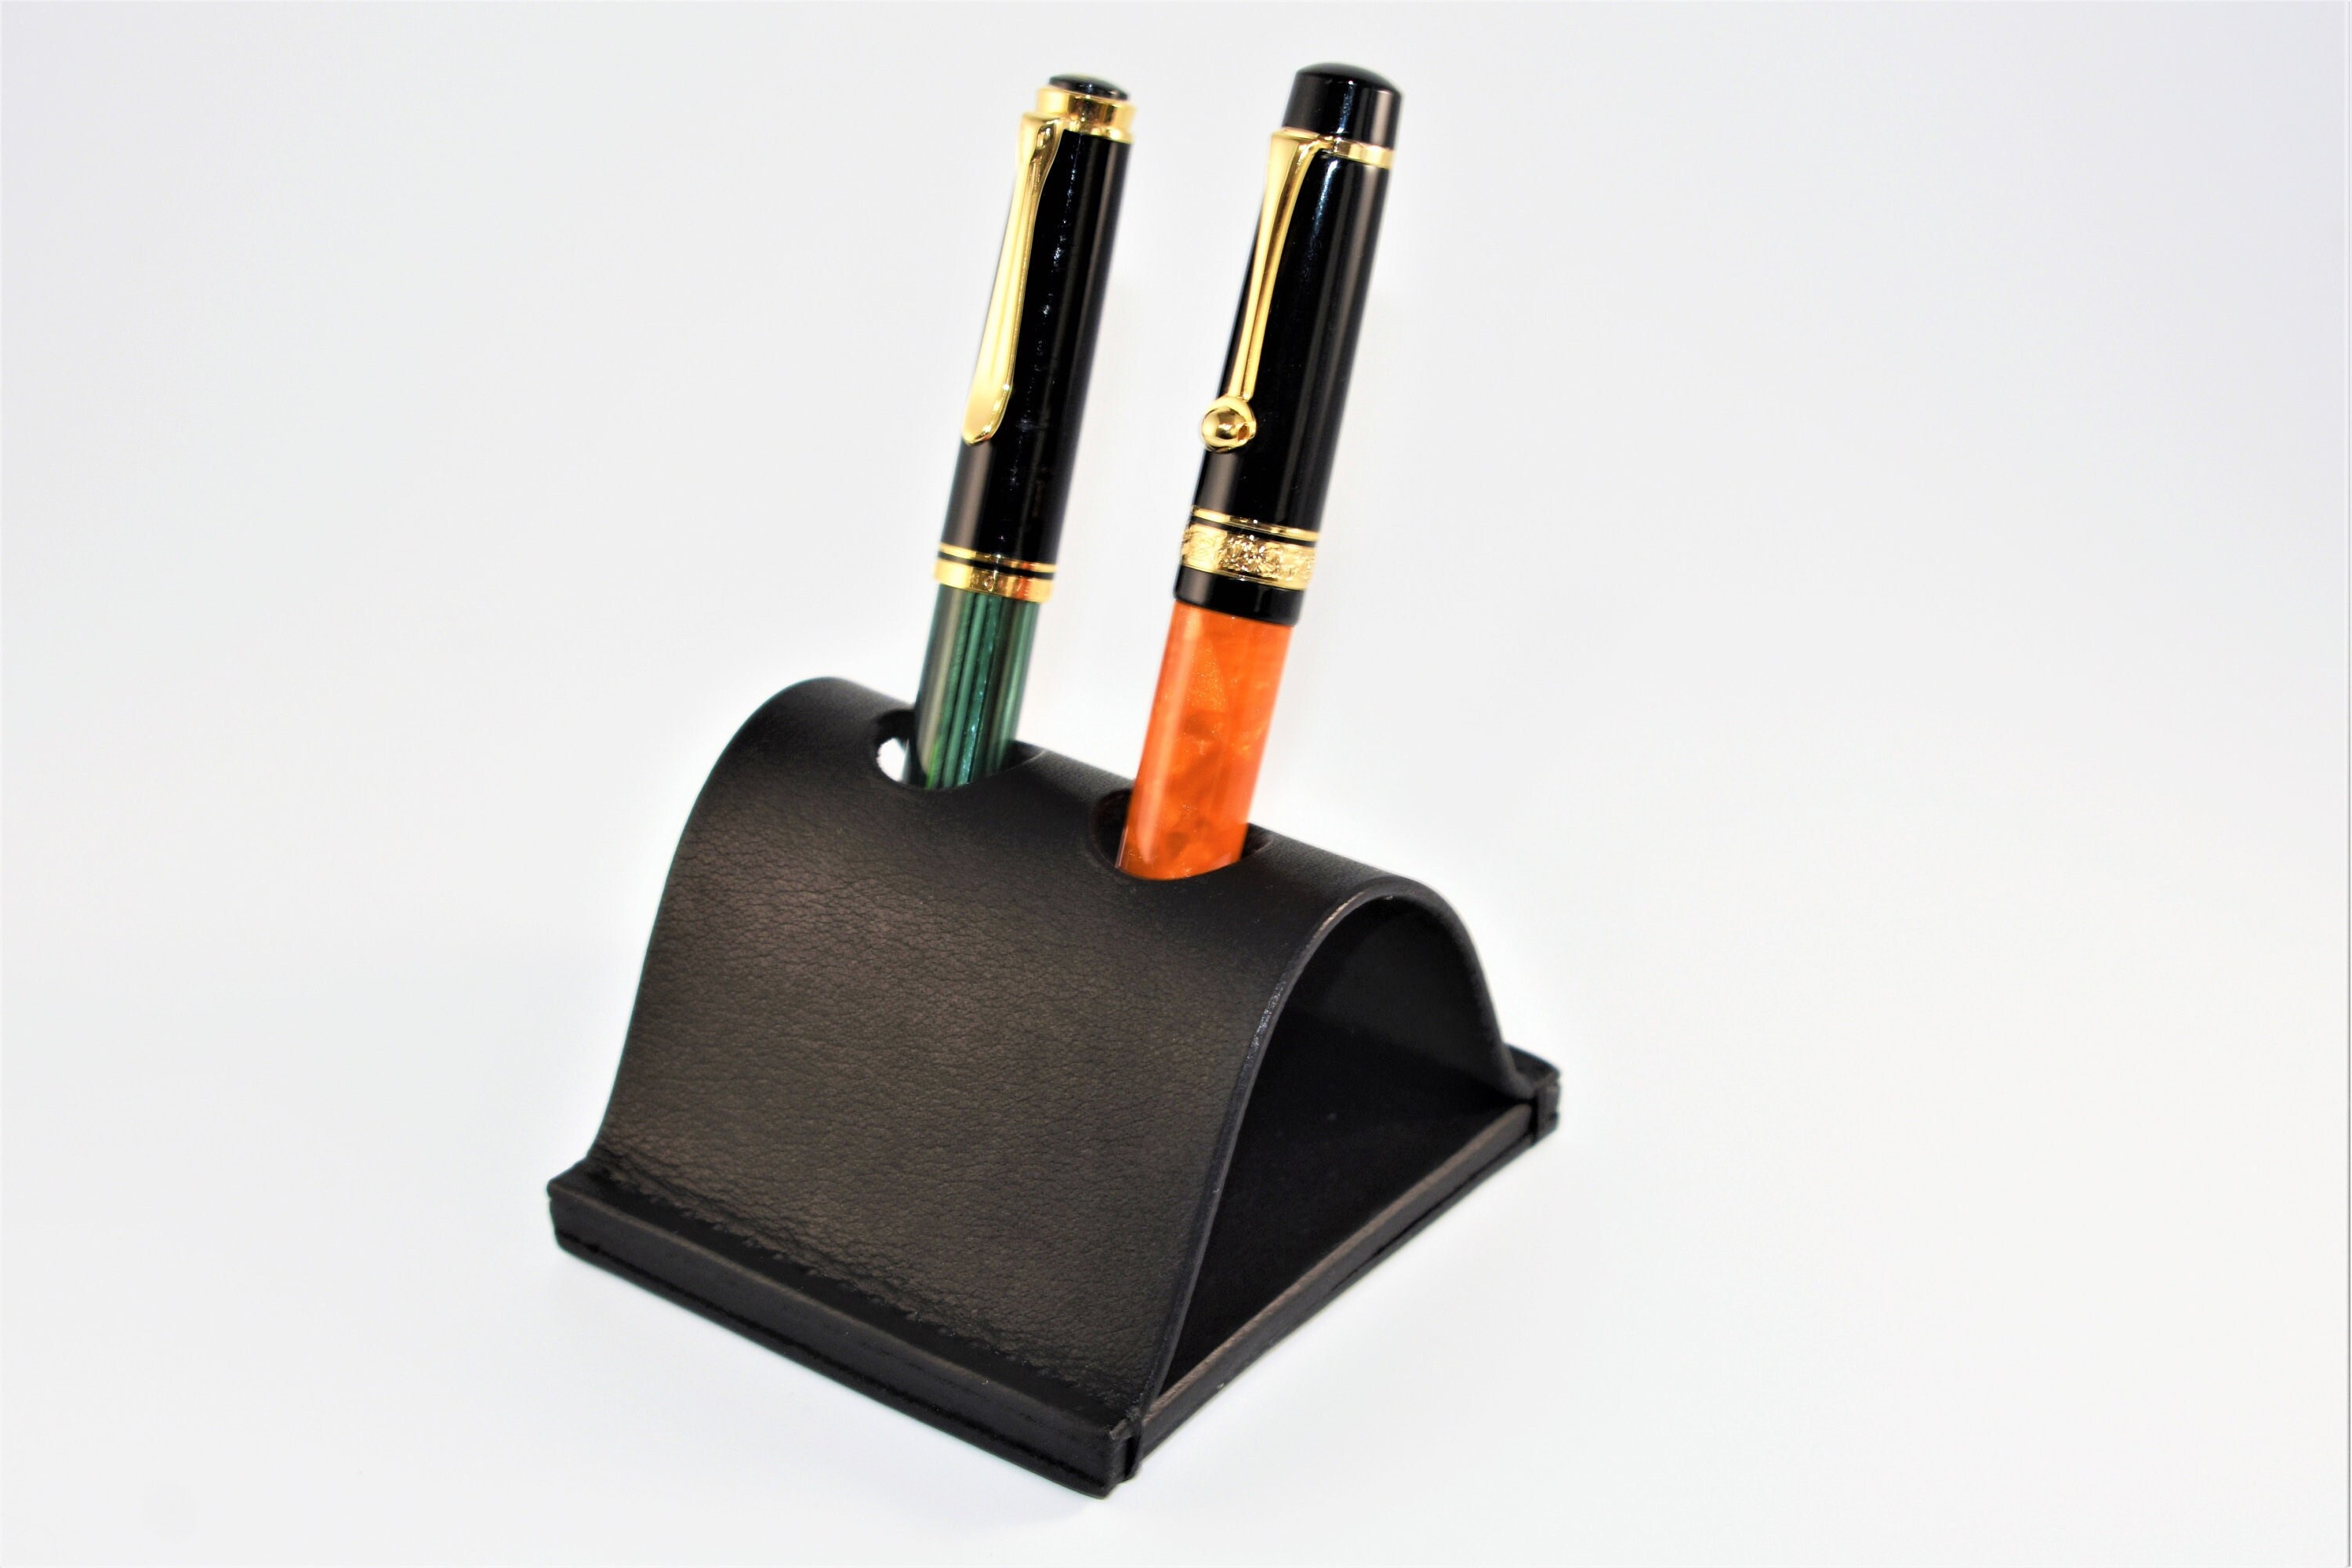 5 Fountain Pen Display Stand 3D Printed Storage for Pens Pencils Brushes  Tools 